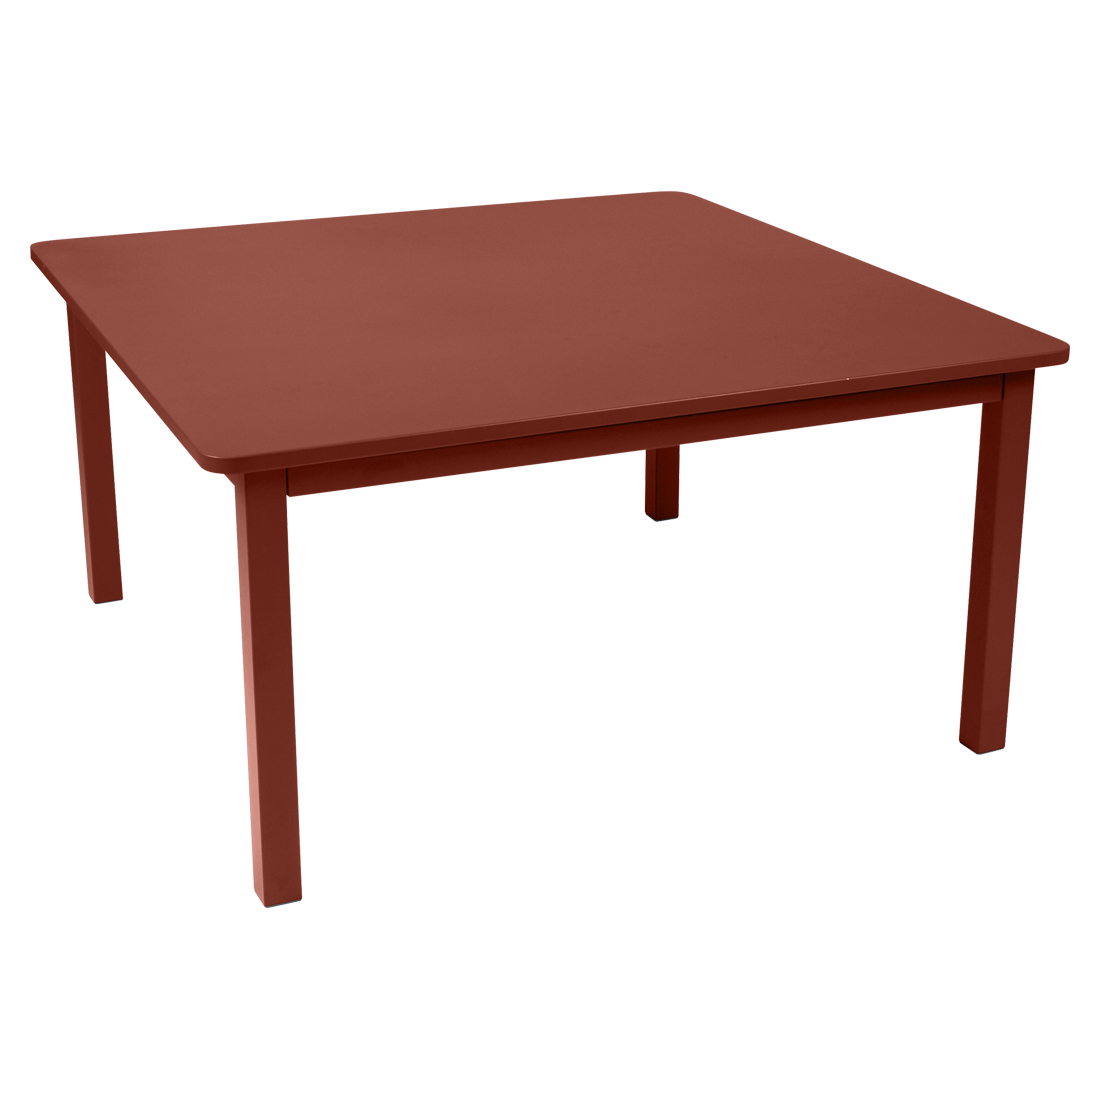 Table 143 x 143 cm craft ocre rouge